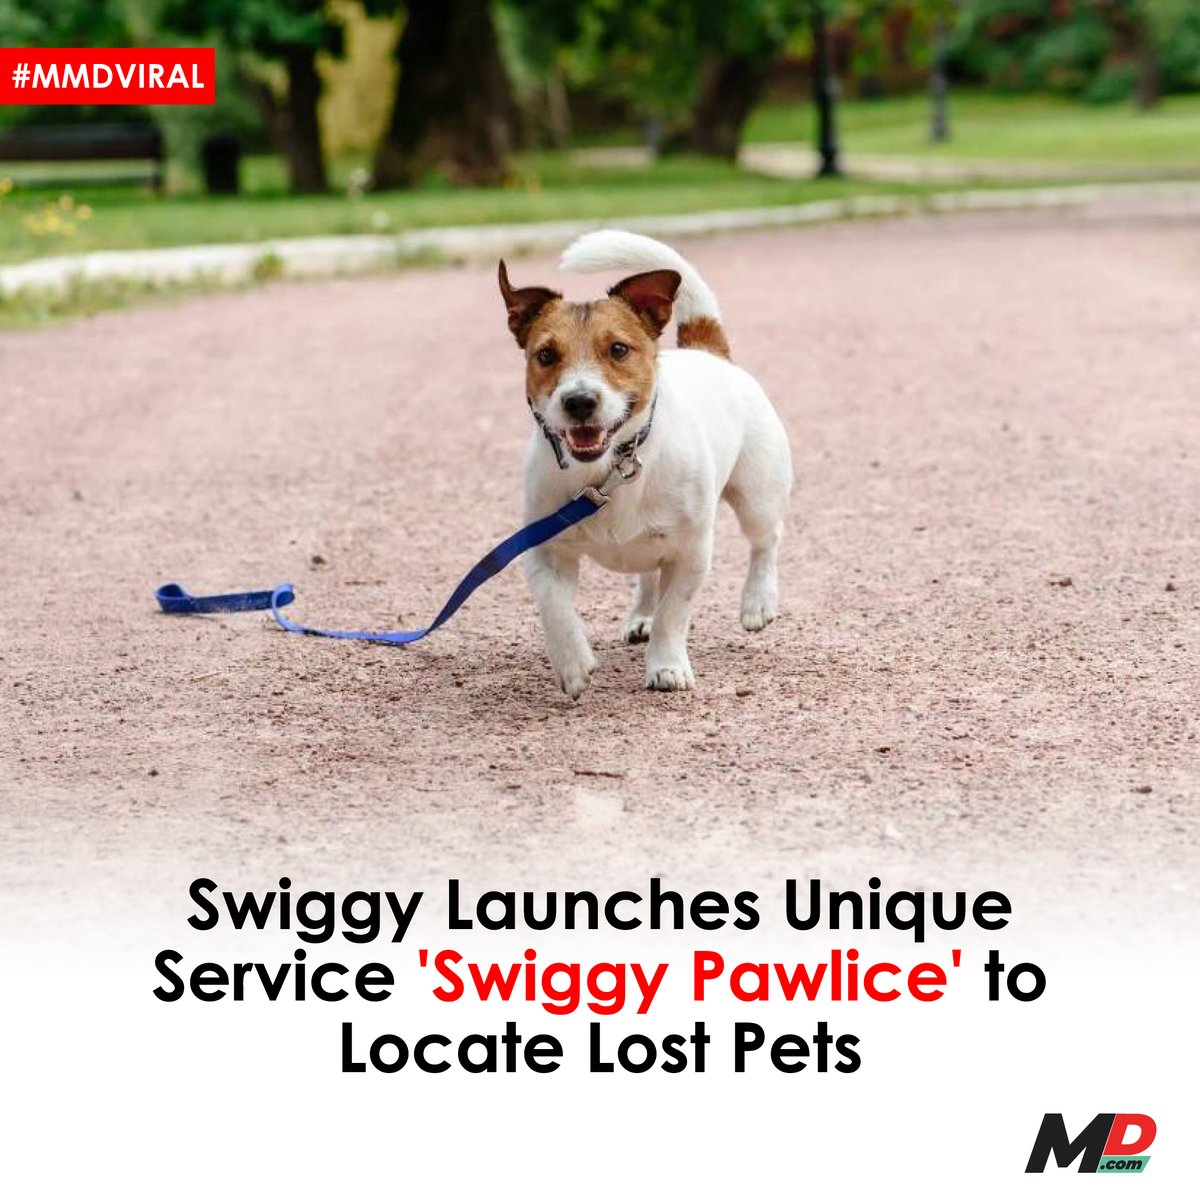 Food delivery giant, @Swiggy, has recently unveiled an innovative feature, Swiggy Pawlice. This unique service is designed to assist pet owners in finding their lost pets, leveraging the extensive network of Swiggy's delivery partners. Swiggy Pawlice was launched in…